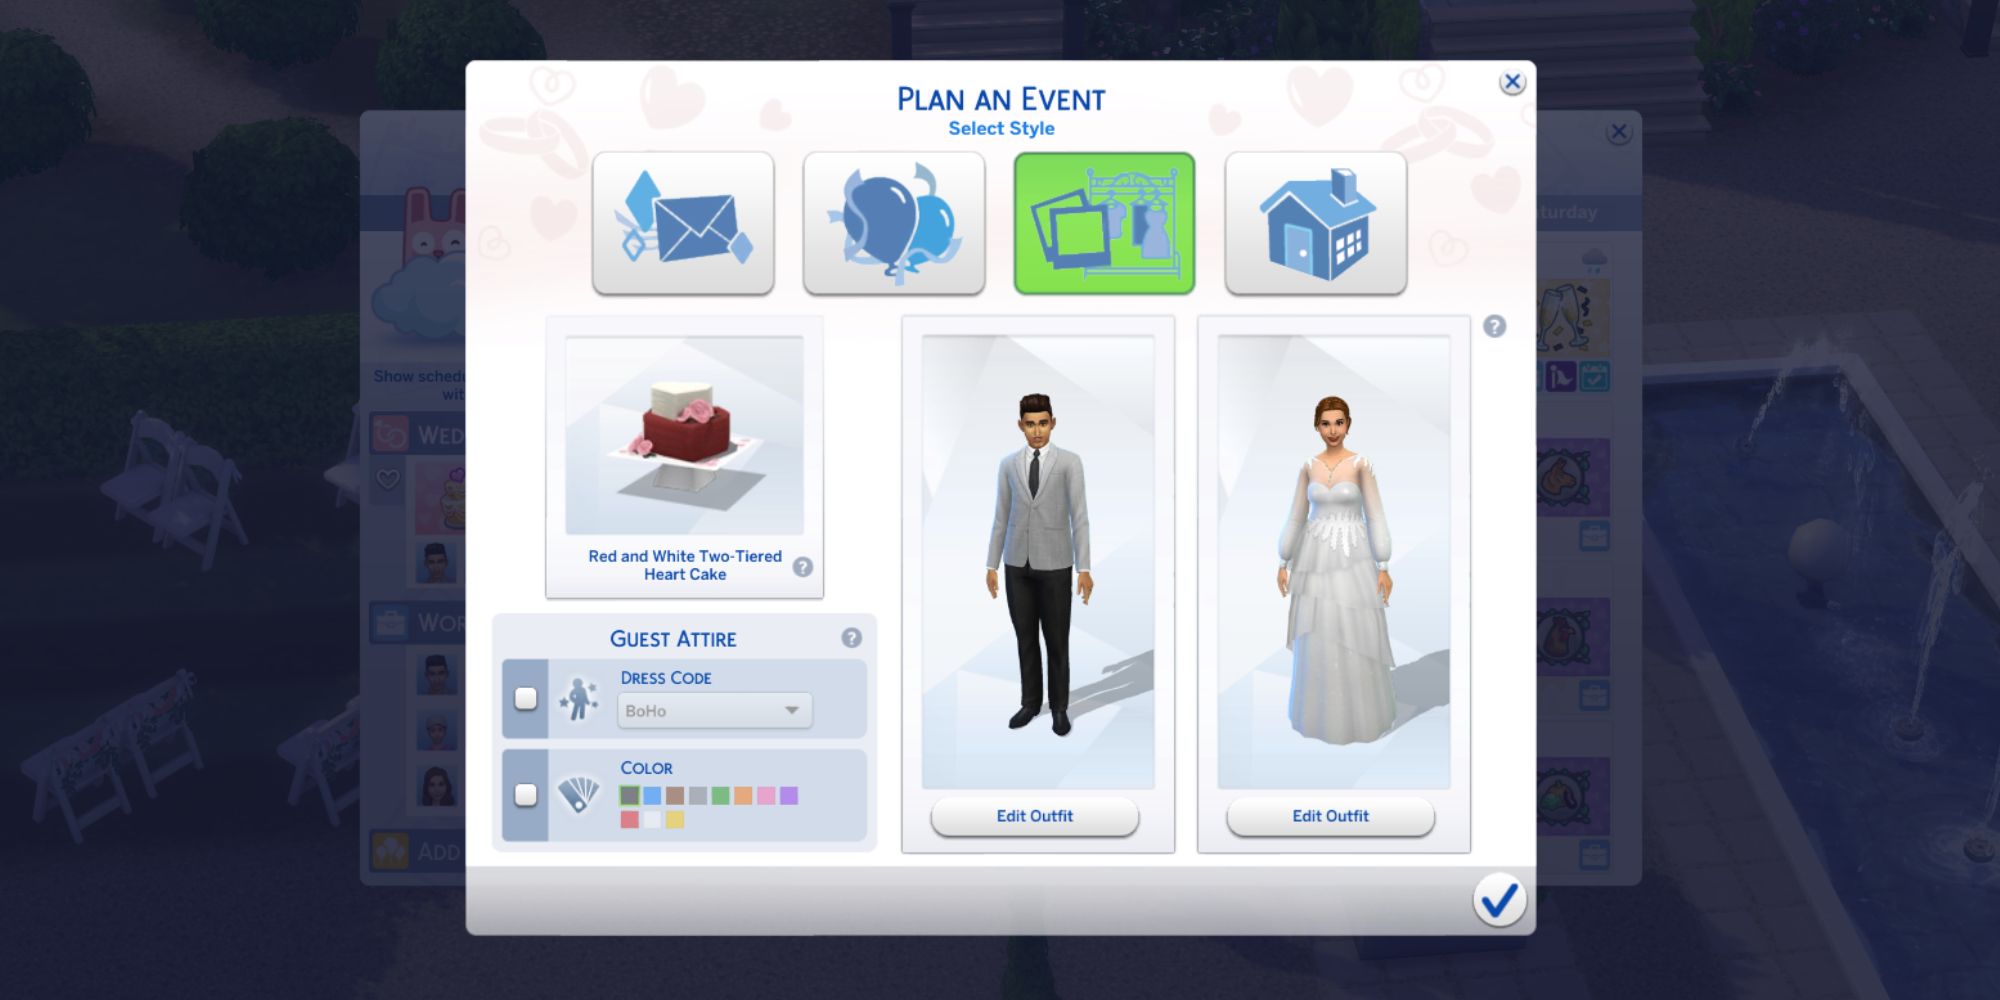 Sims 4 wedding plan an event outfit screen